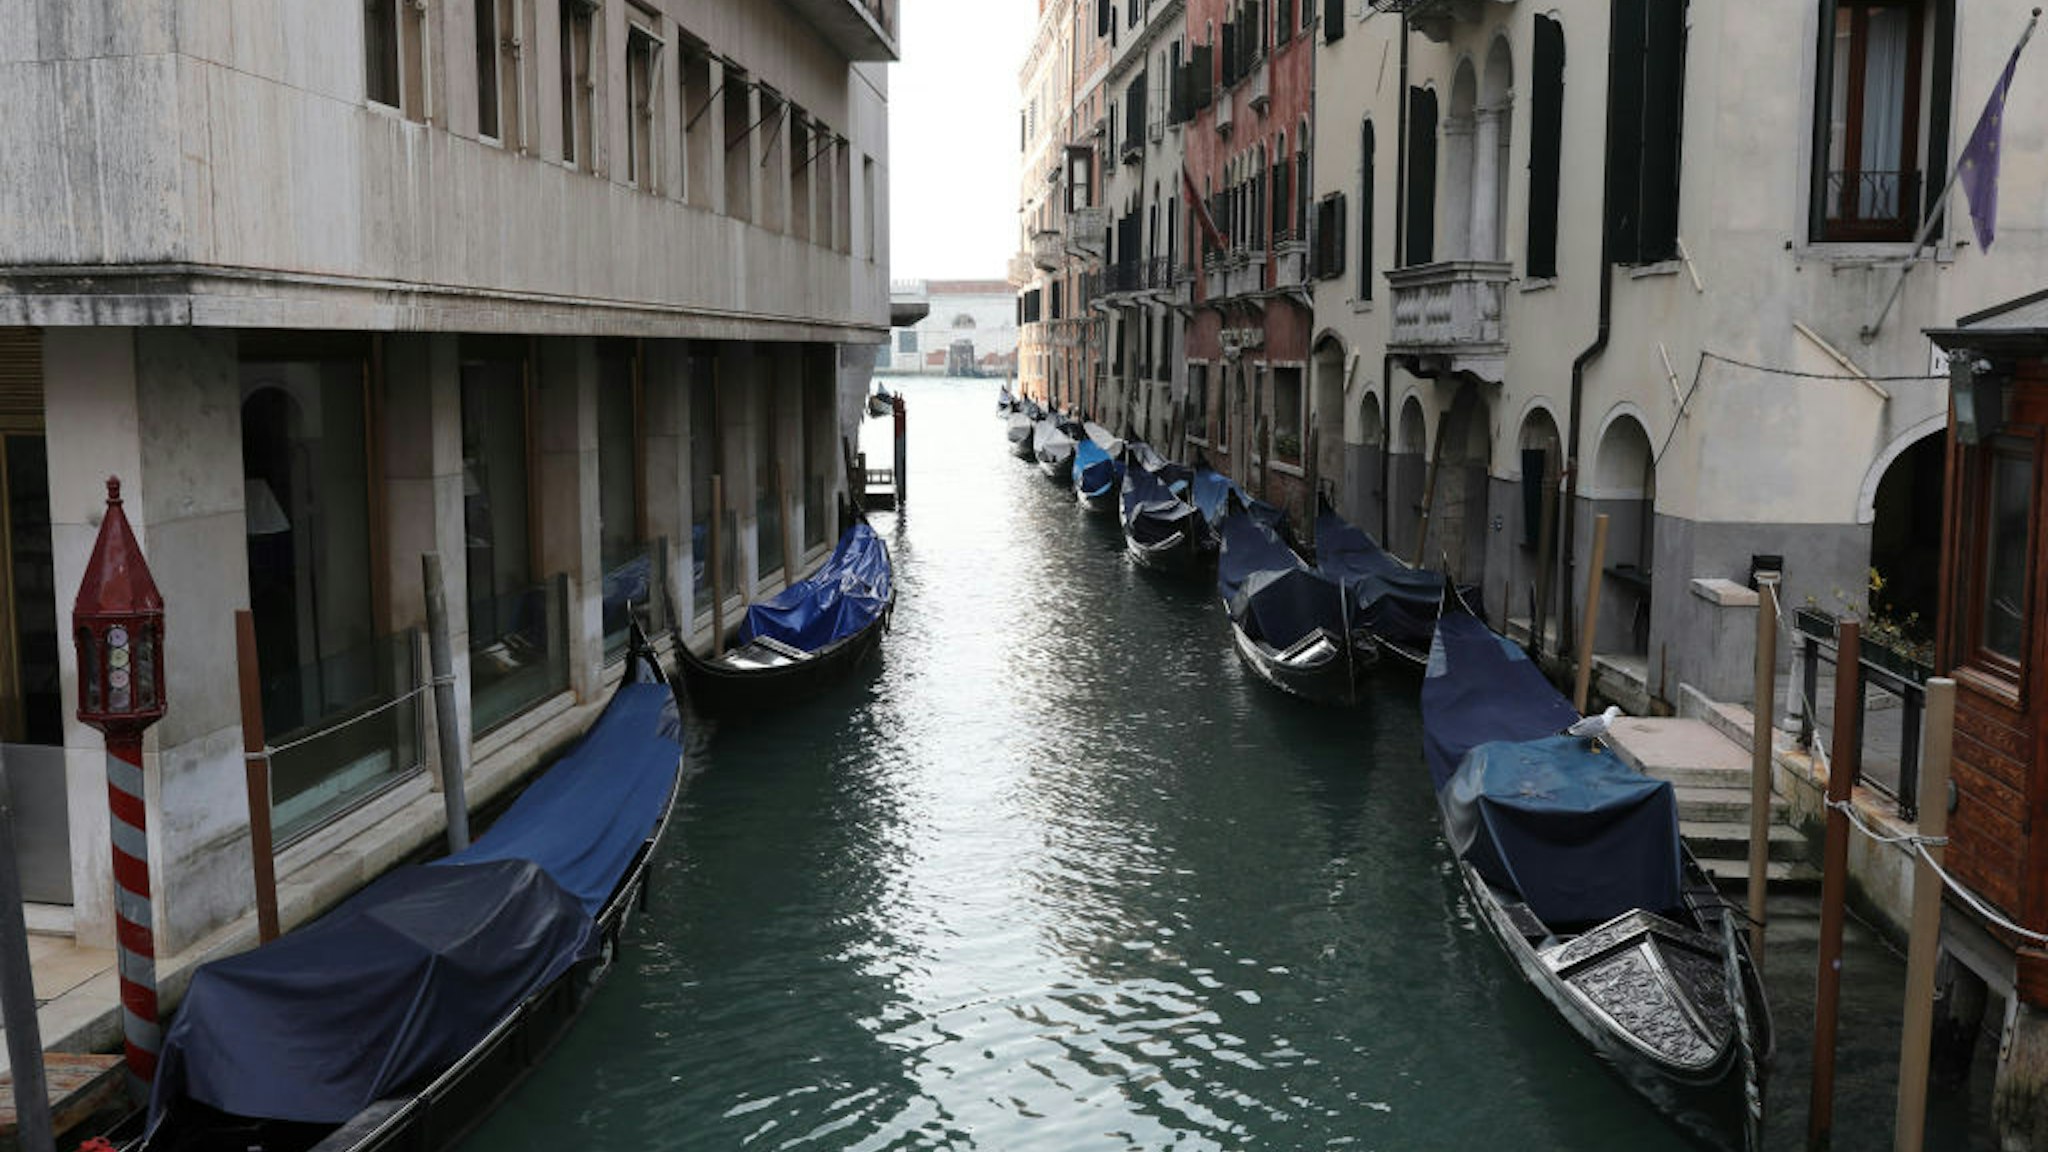 A completely empty canal with unused Gondole is seen on March 9, 2020 in Venice, Italy. Prime Minister Giuseppe Conte announced a "national emergency" due to the coronavirus outbreak and imposed quarantines on the Lombardy and Veneto regions, which contain roughly a quarter of the country's population.